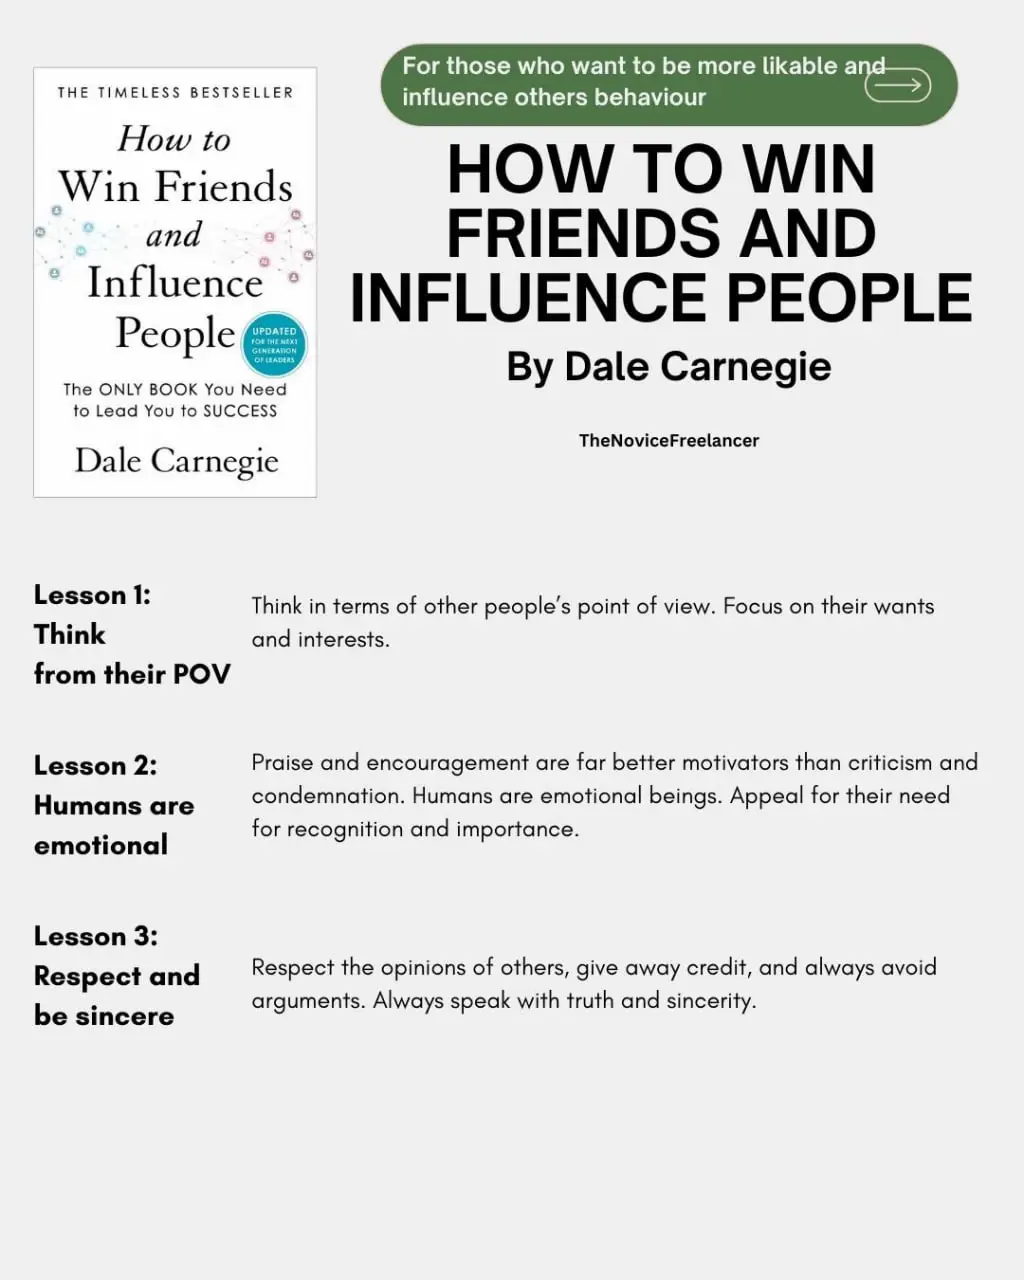 Hate networking? Read these! 's images(3)